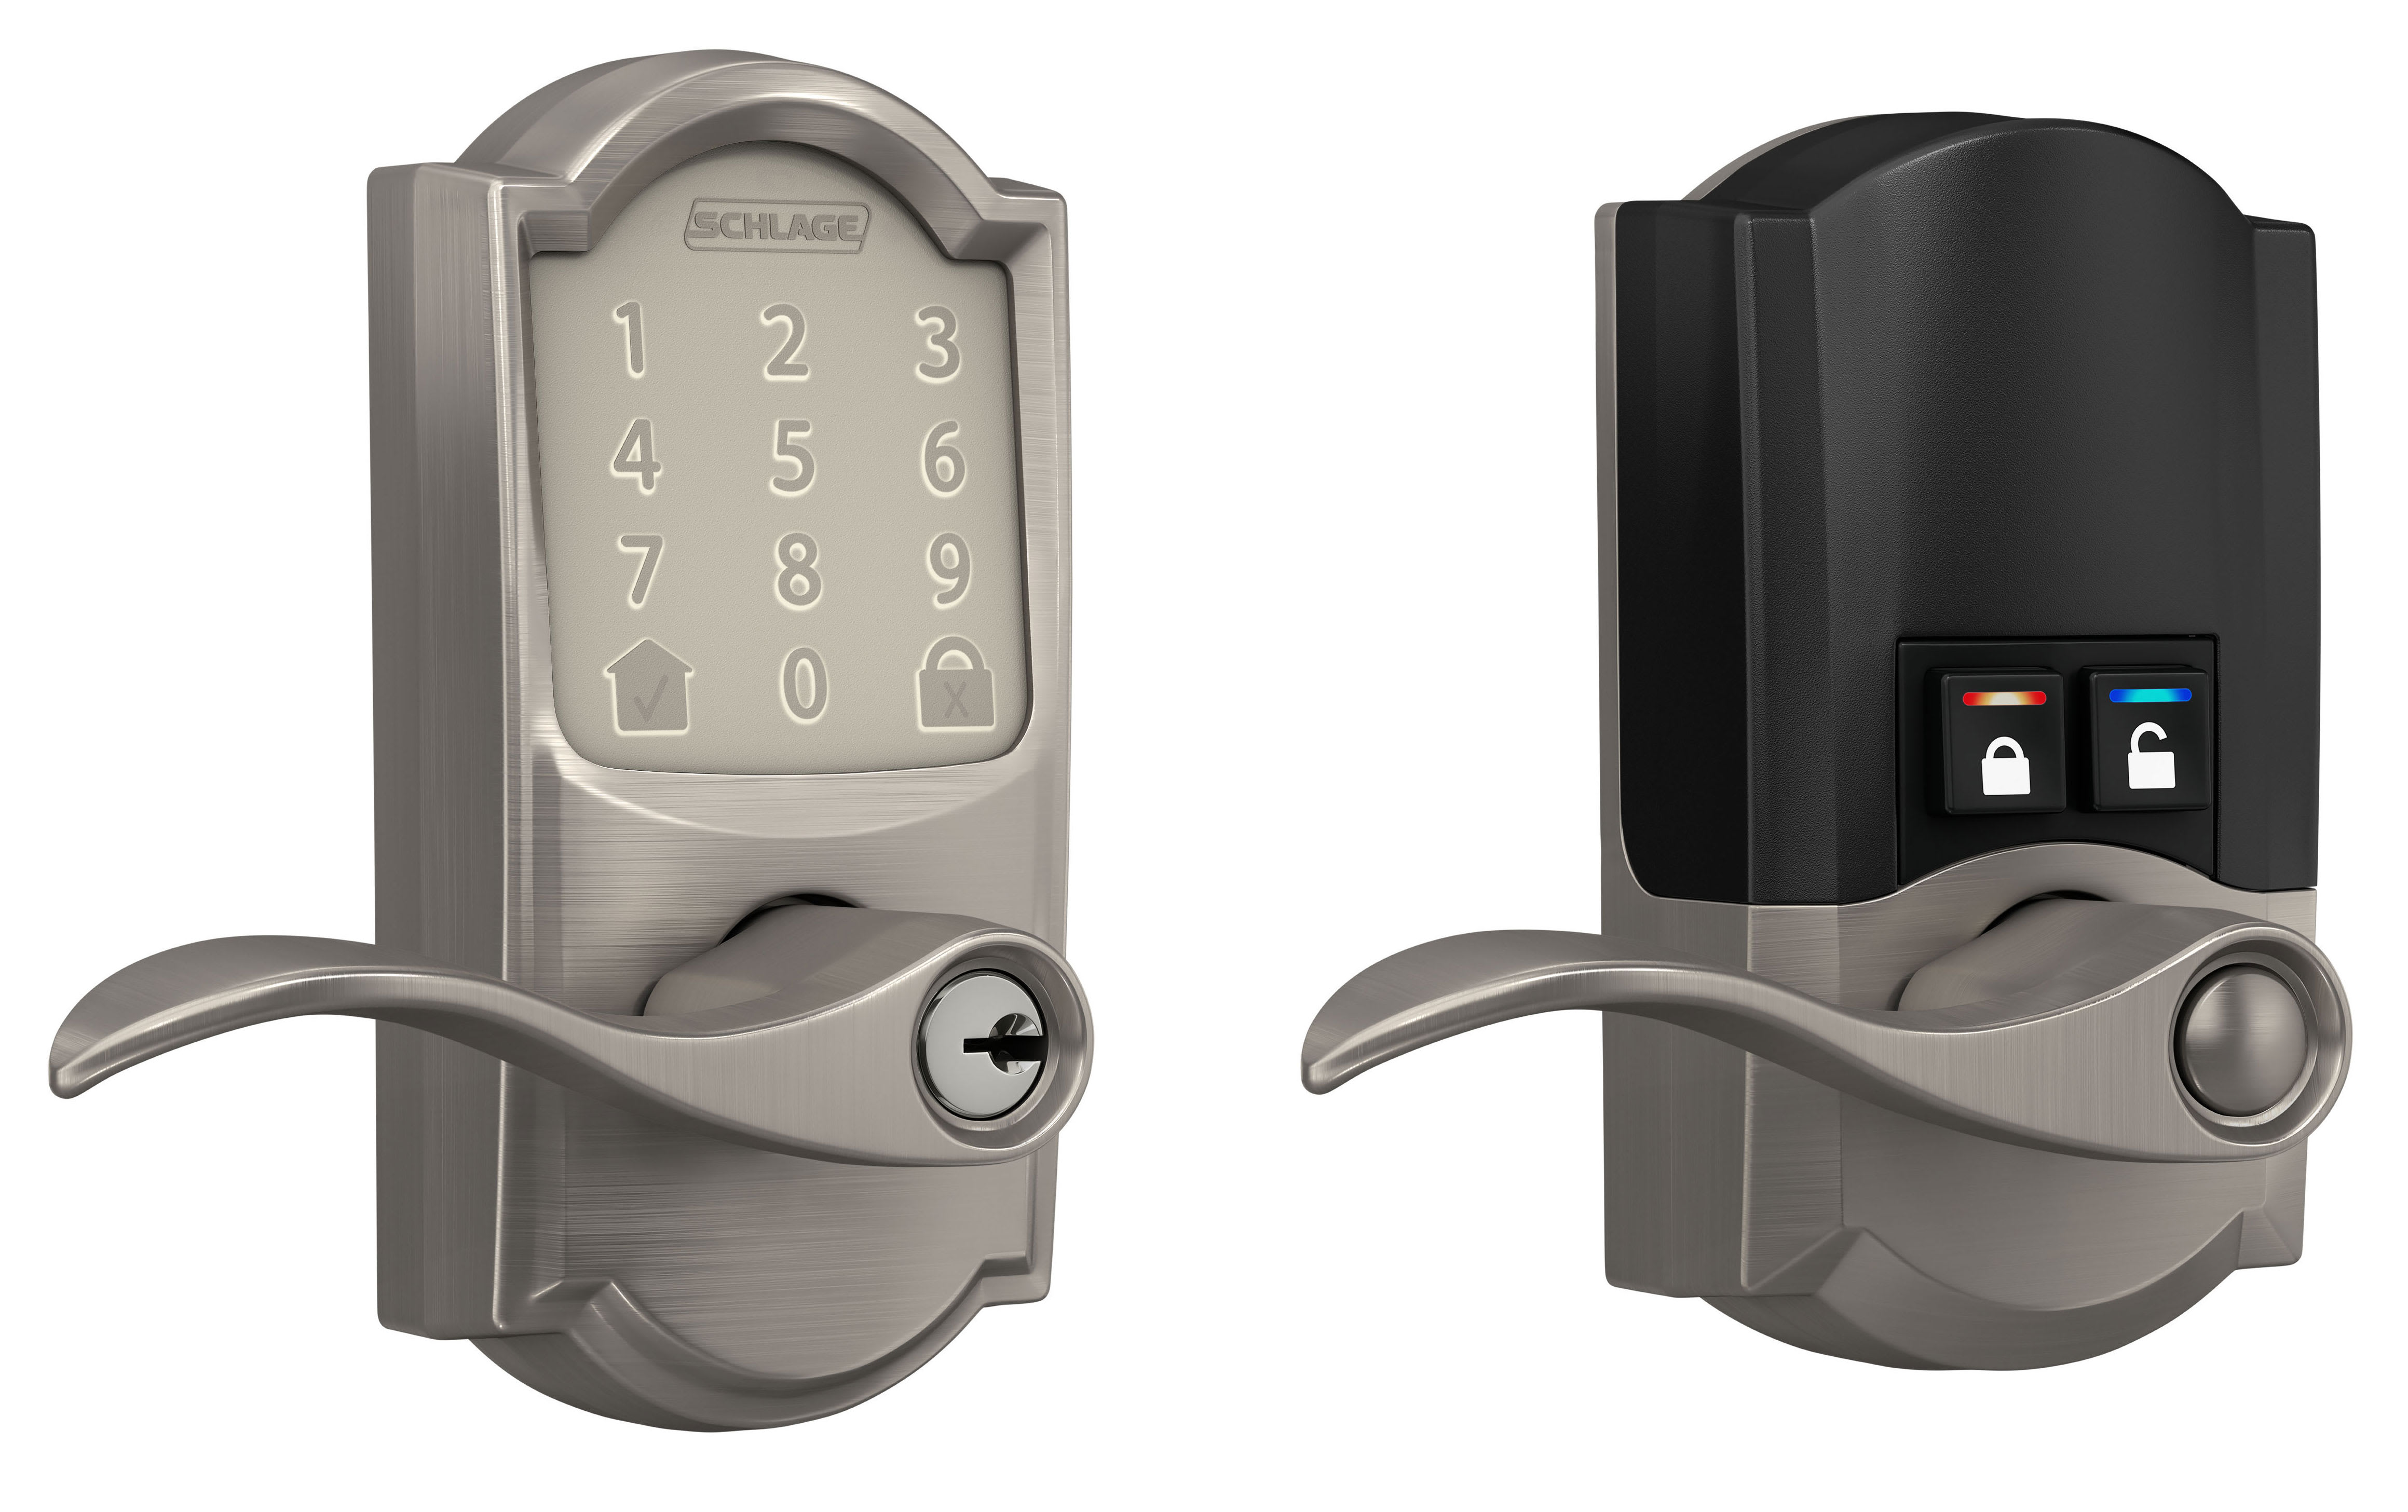 Schlage® Touch Camelot Satin Nickel Electronic Keyless Entry Door